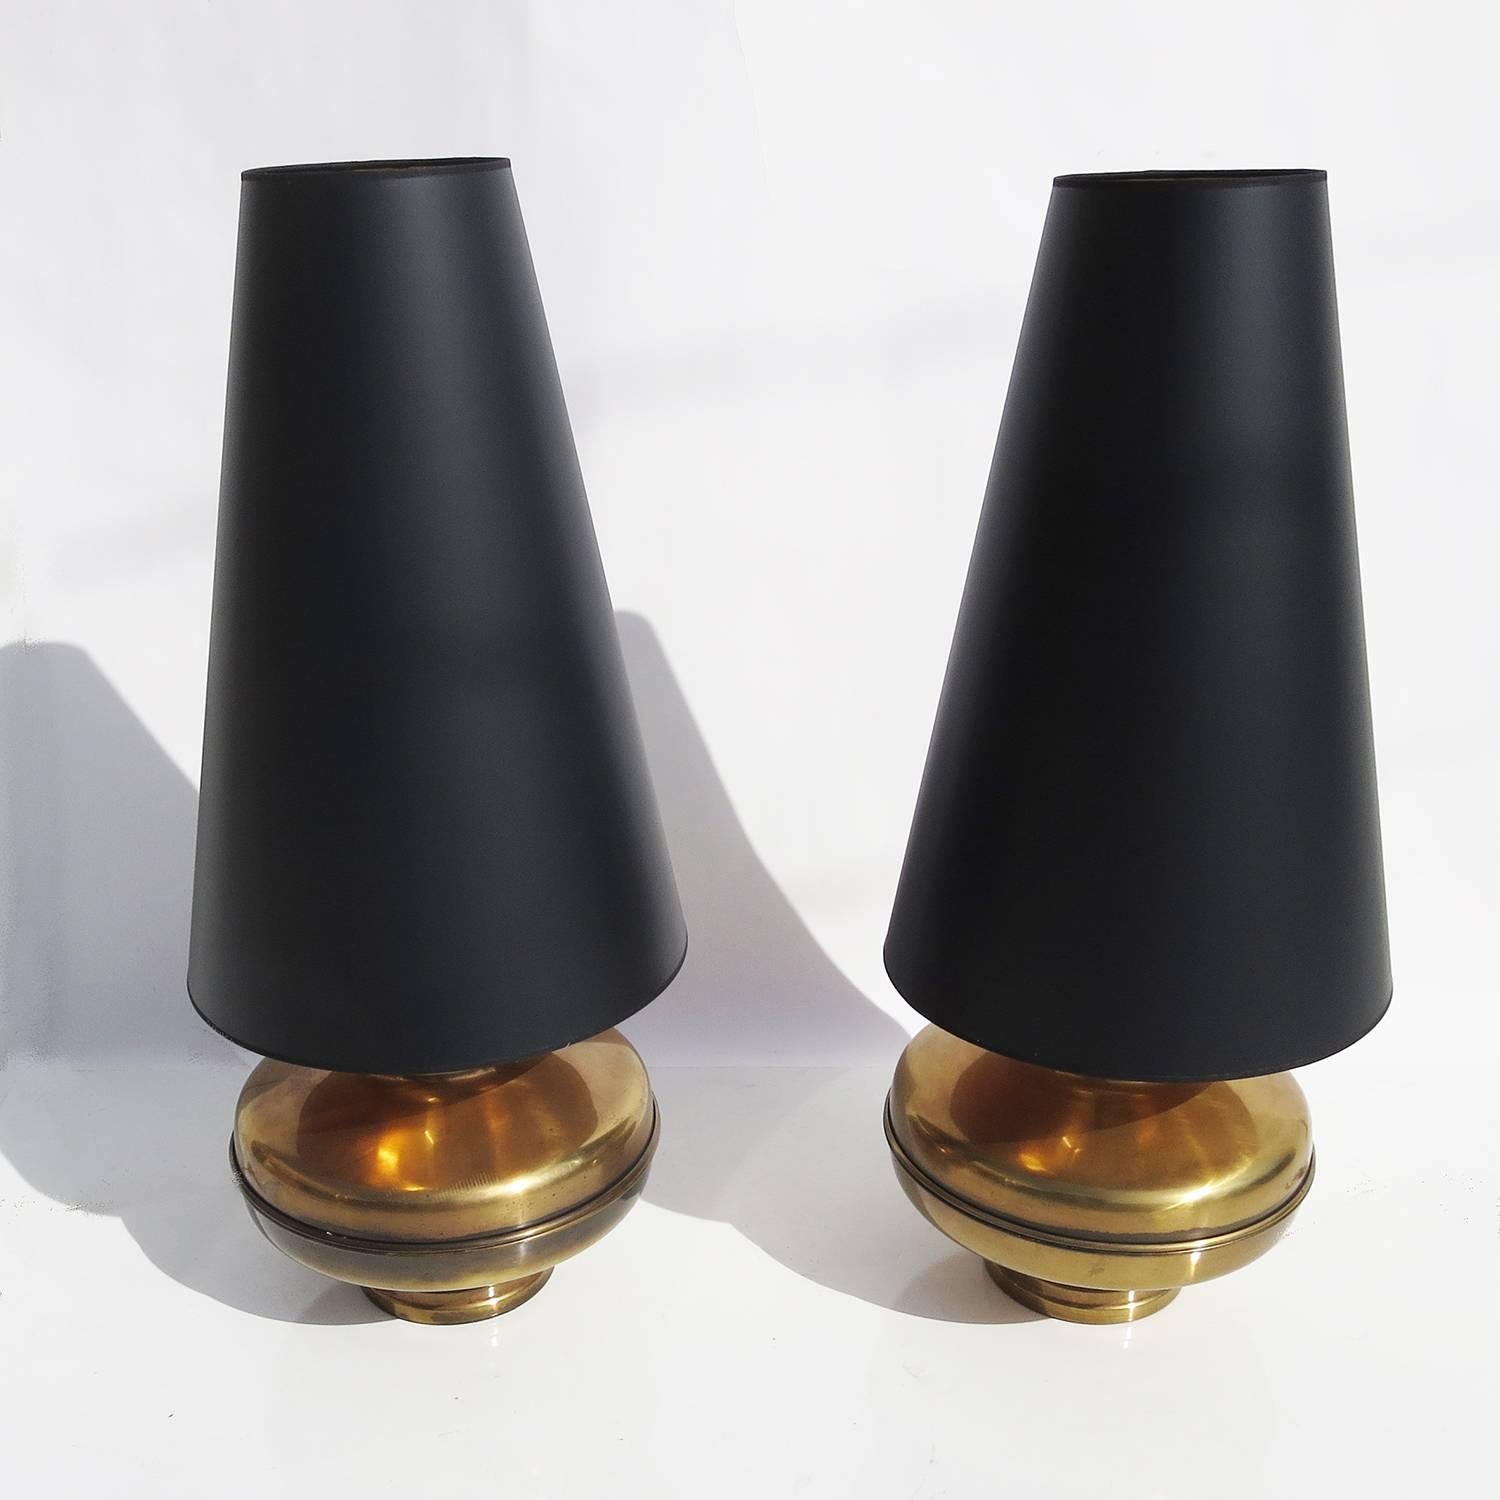 This great pair of lamps will certainly make a statement in any room. The bases are lacquered antique brass in nice original condition. The shades were custom-made by us in a satin black paper with a gold foil interior. The lighting is a standard